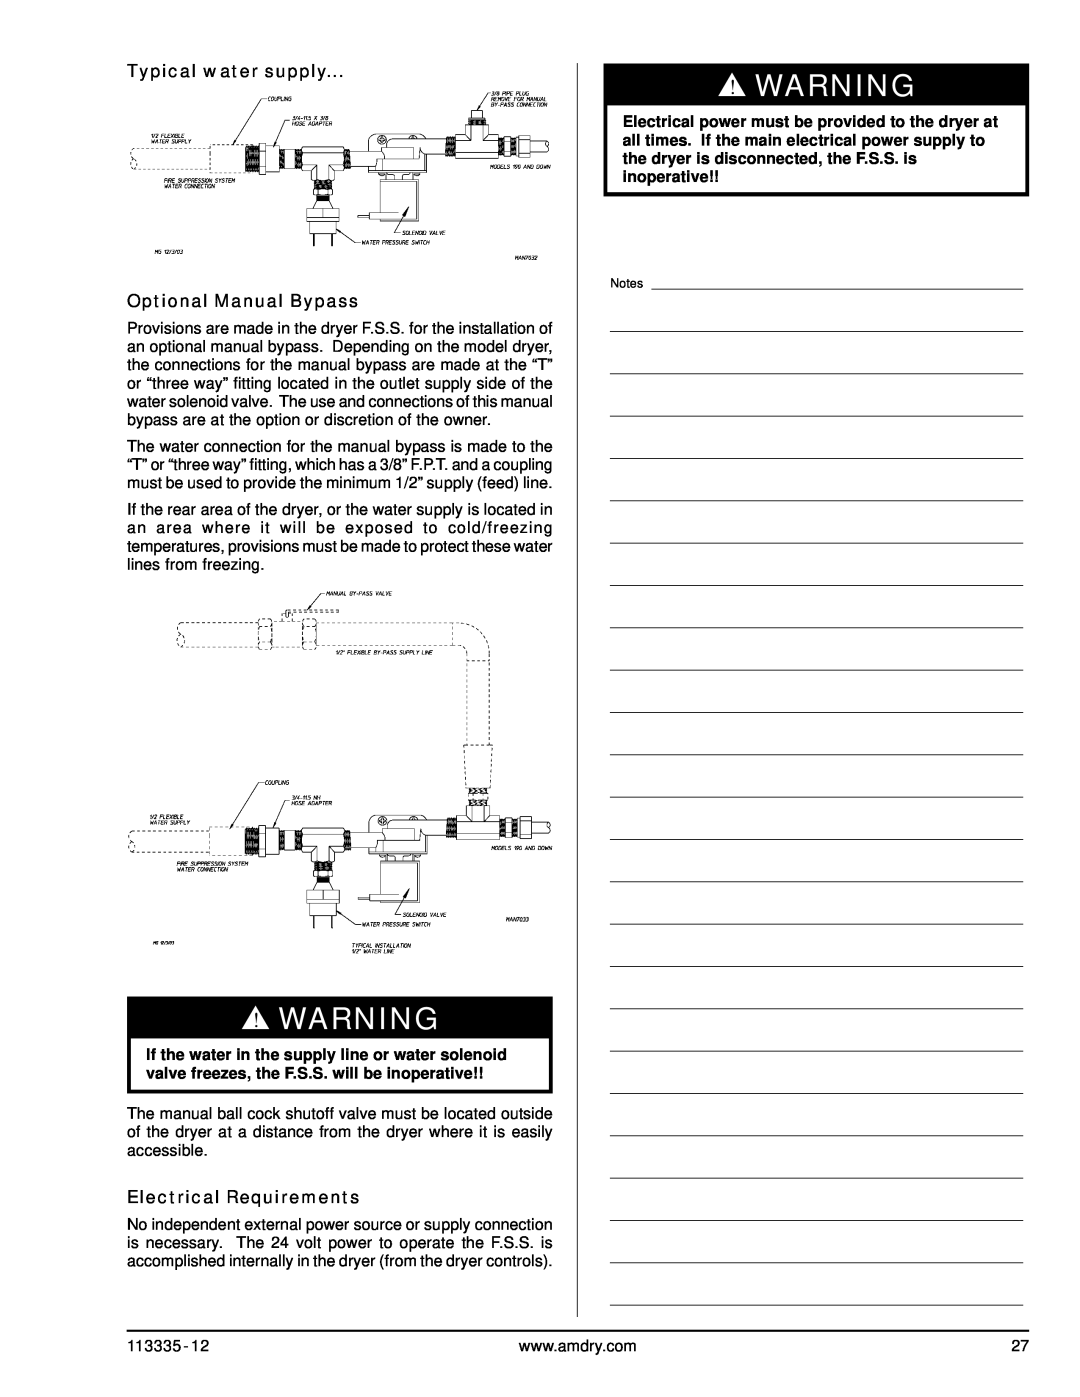 American Dryer Corp ML-130DR, ML-130 III Typical water supply Optional Manual Bypass, Electrical Requirements 